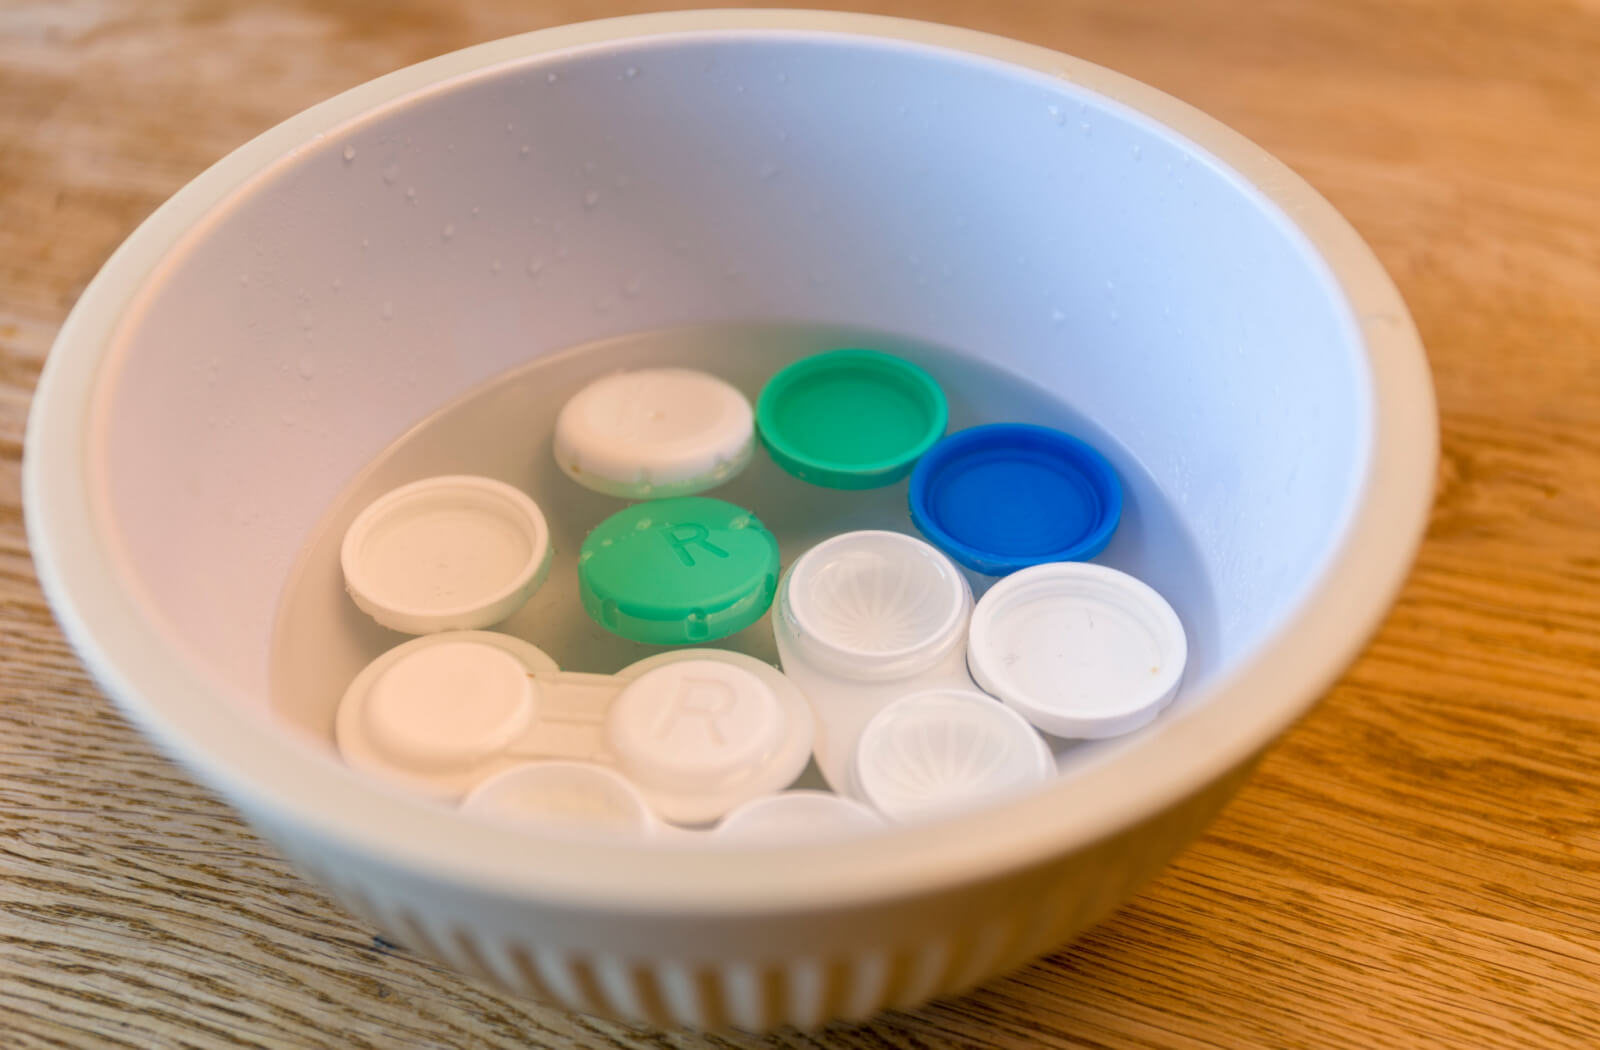 Several contact lens cases are being cleaned and sterilized in a bowl with just boiled steaming hot water before storing contact lenses in it.